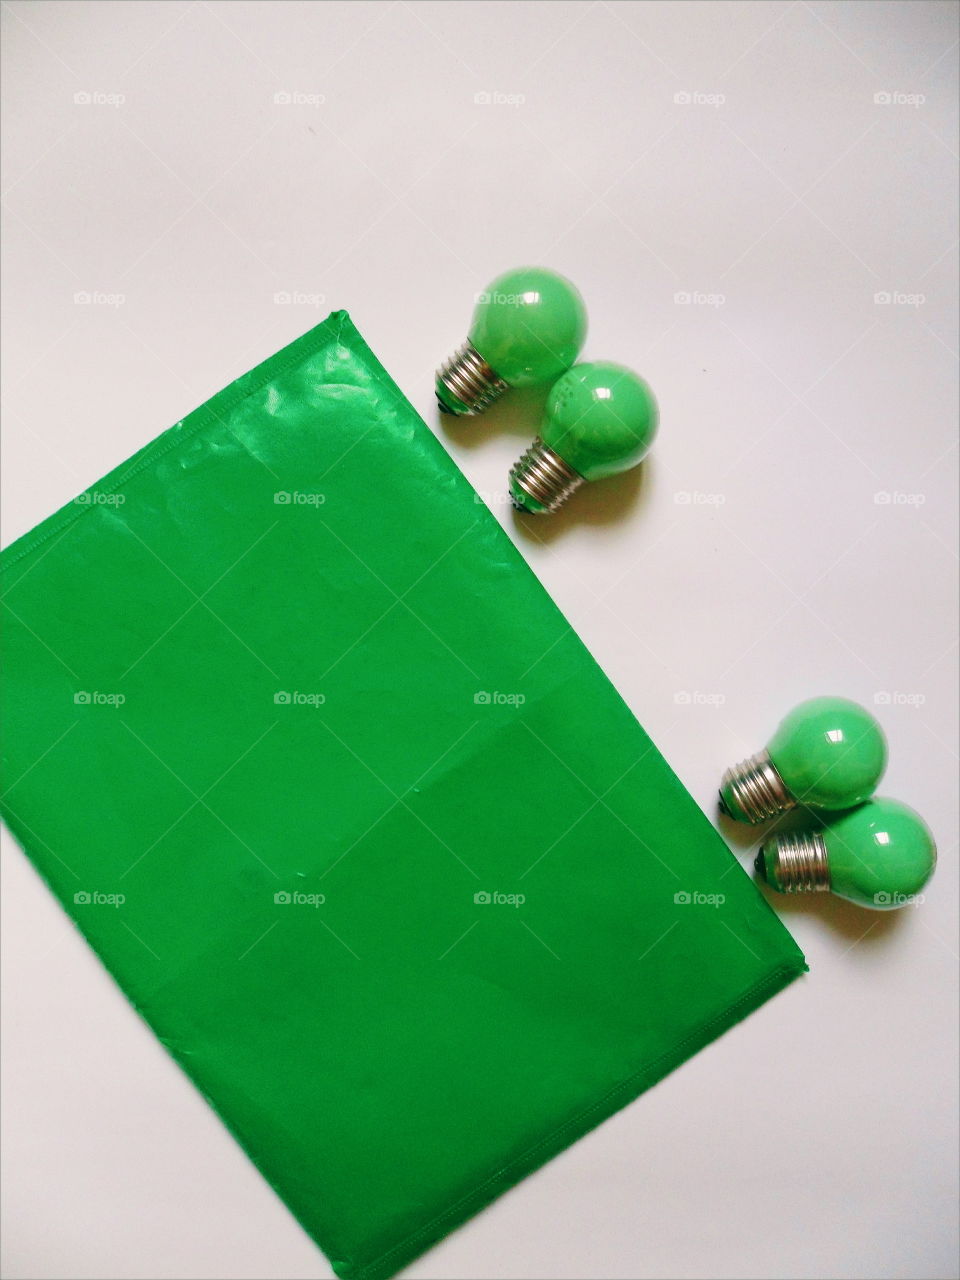 Green light bulbs and a green folder for documents